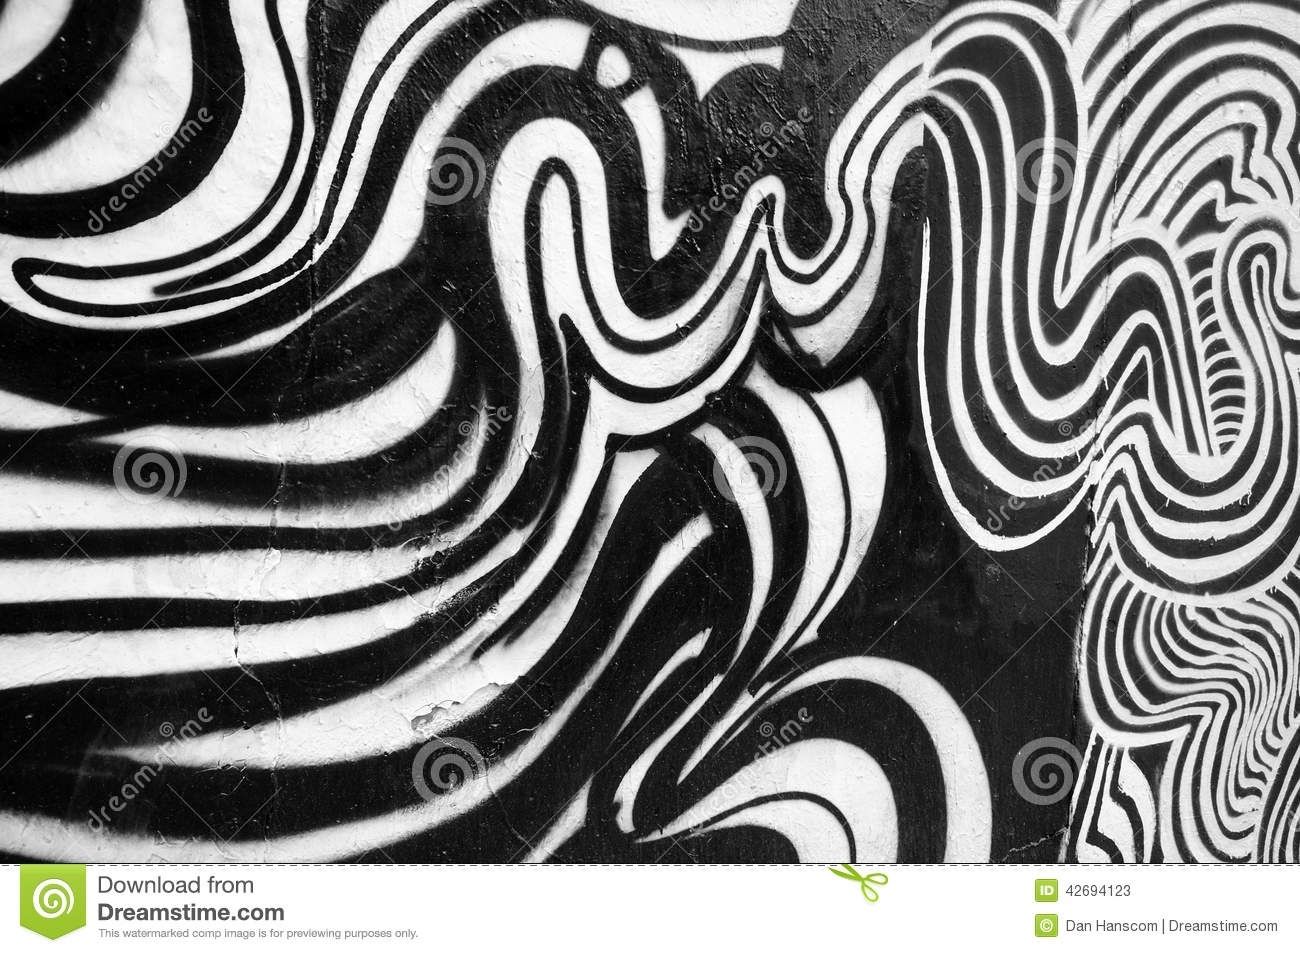 Black And White Graffiti Wall Art Black And White Abstract Throughout Most Recently Released Black And White Abstract Wall Art (View 20 of 20)